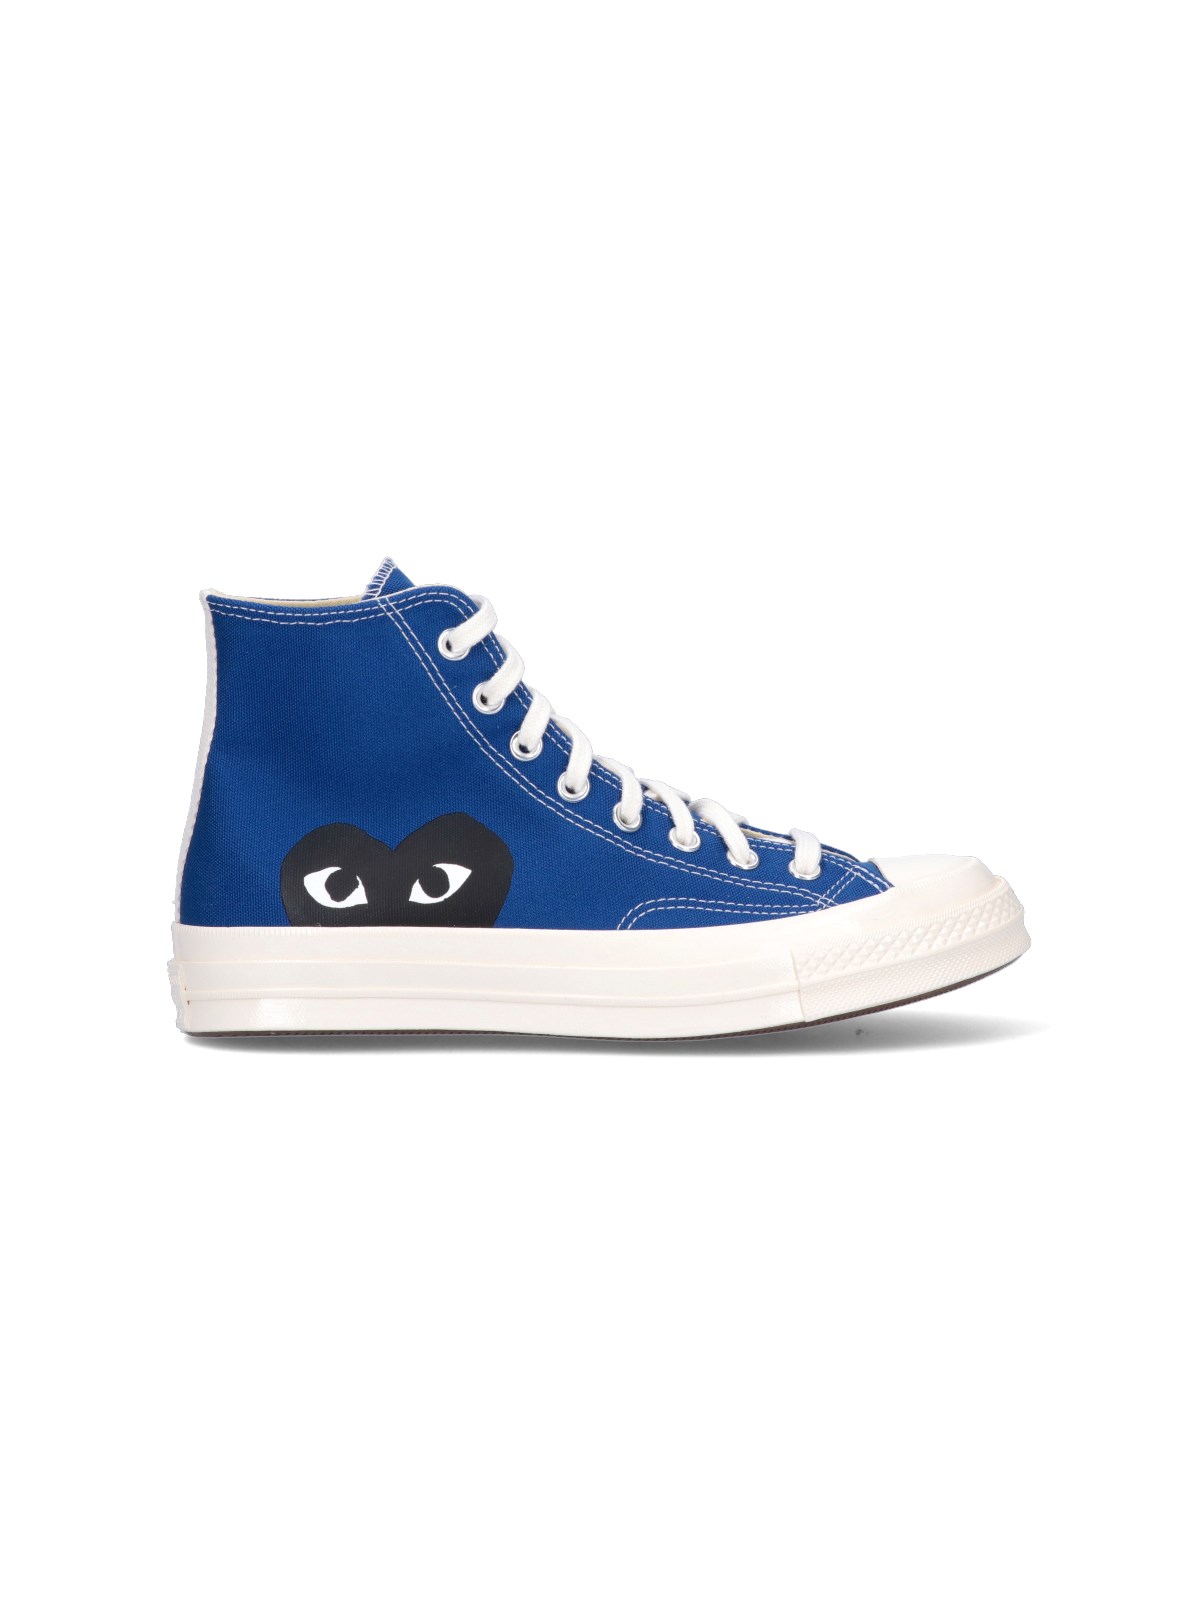 Comme Des Garçons Play Chuck Taylor Sneakers In Blue